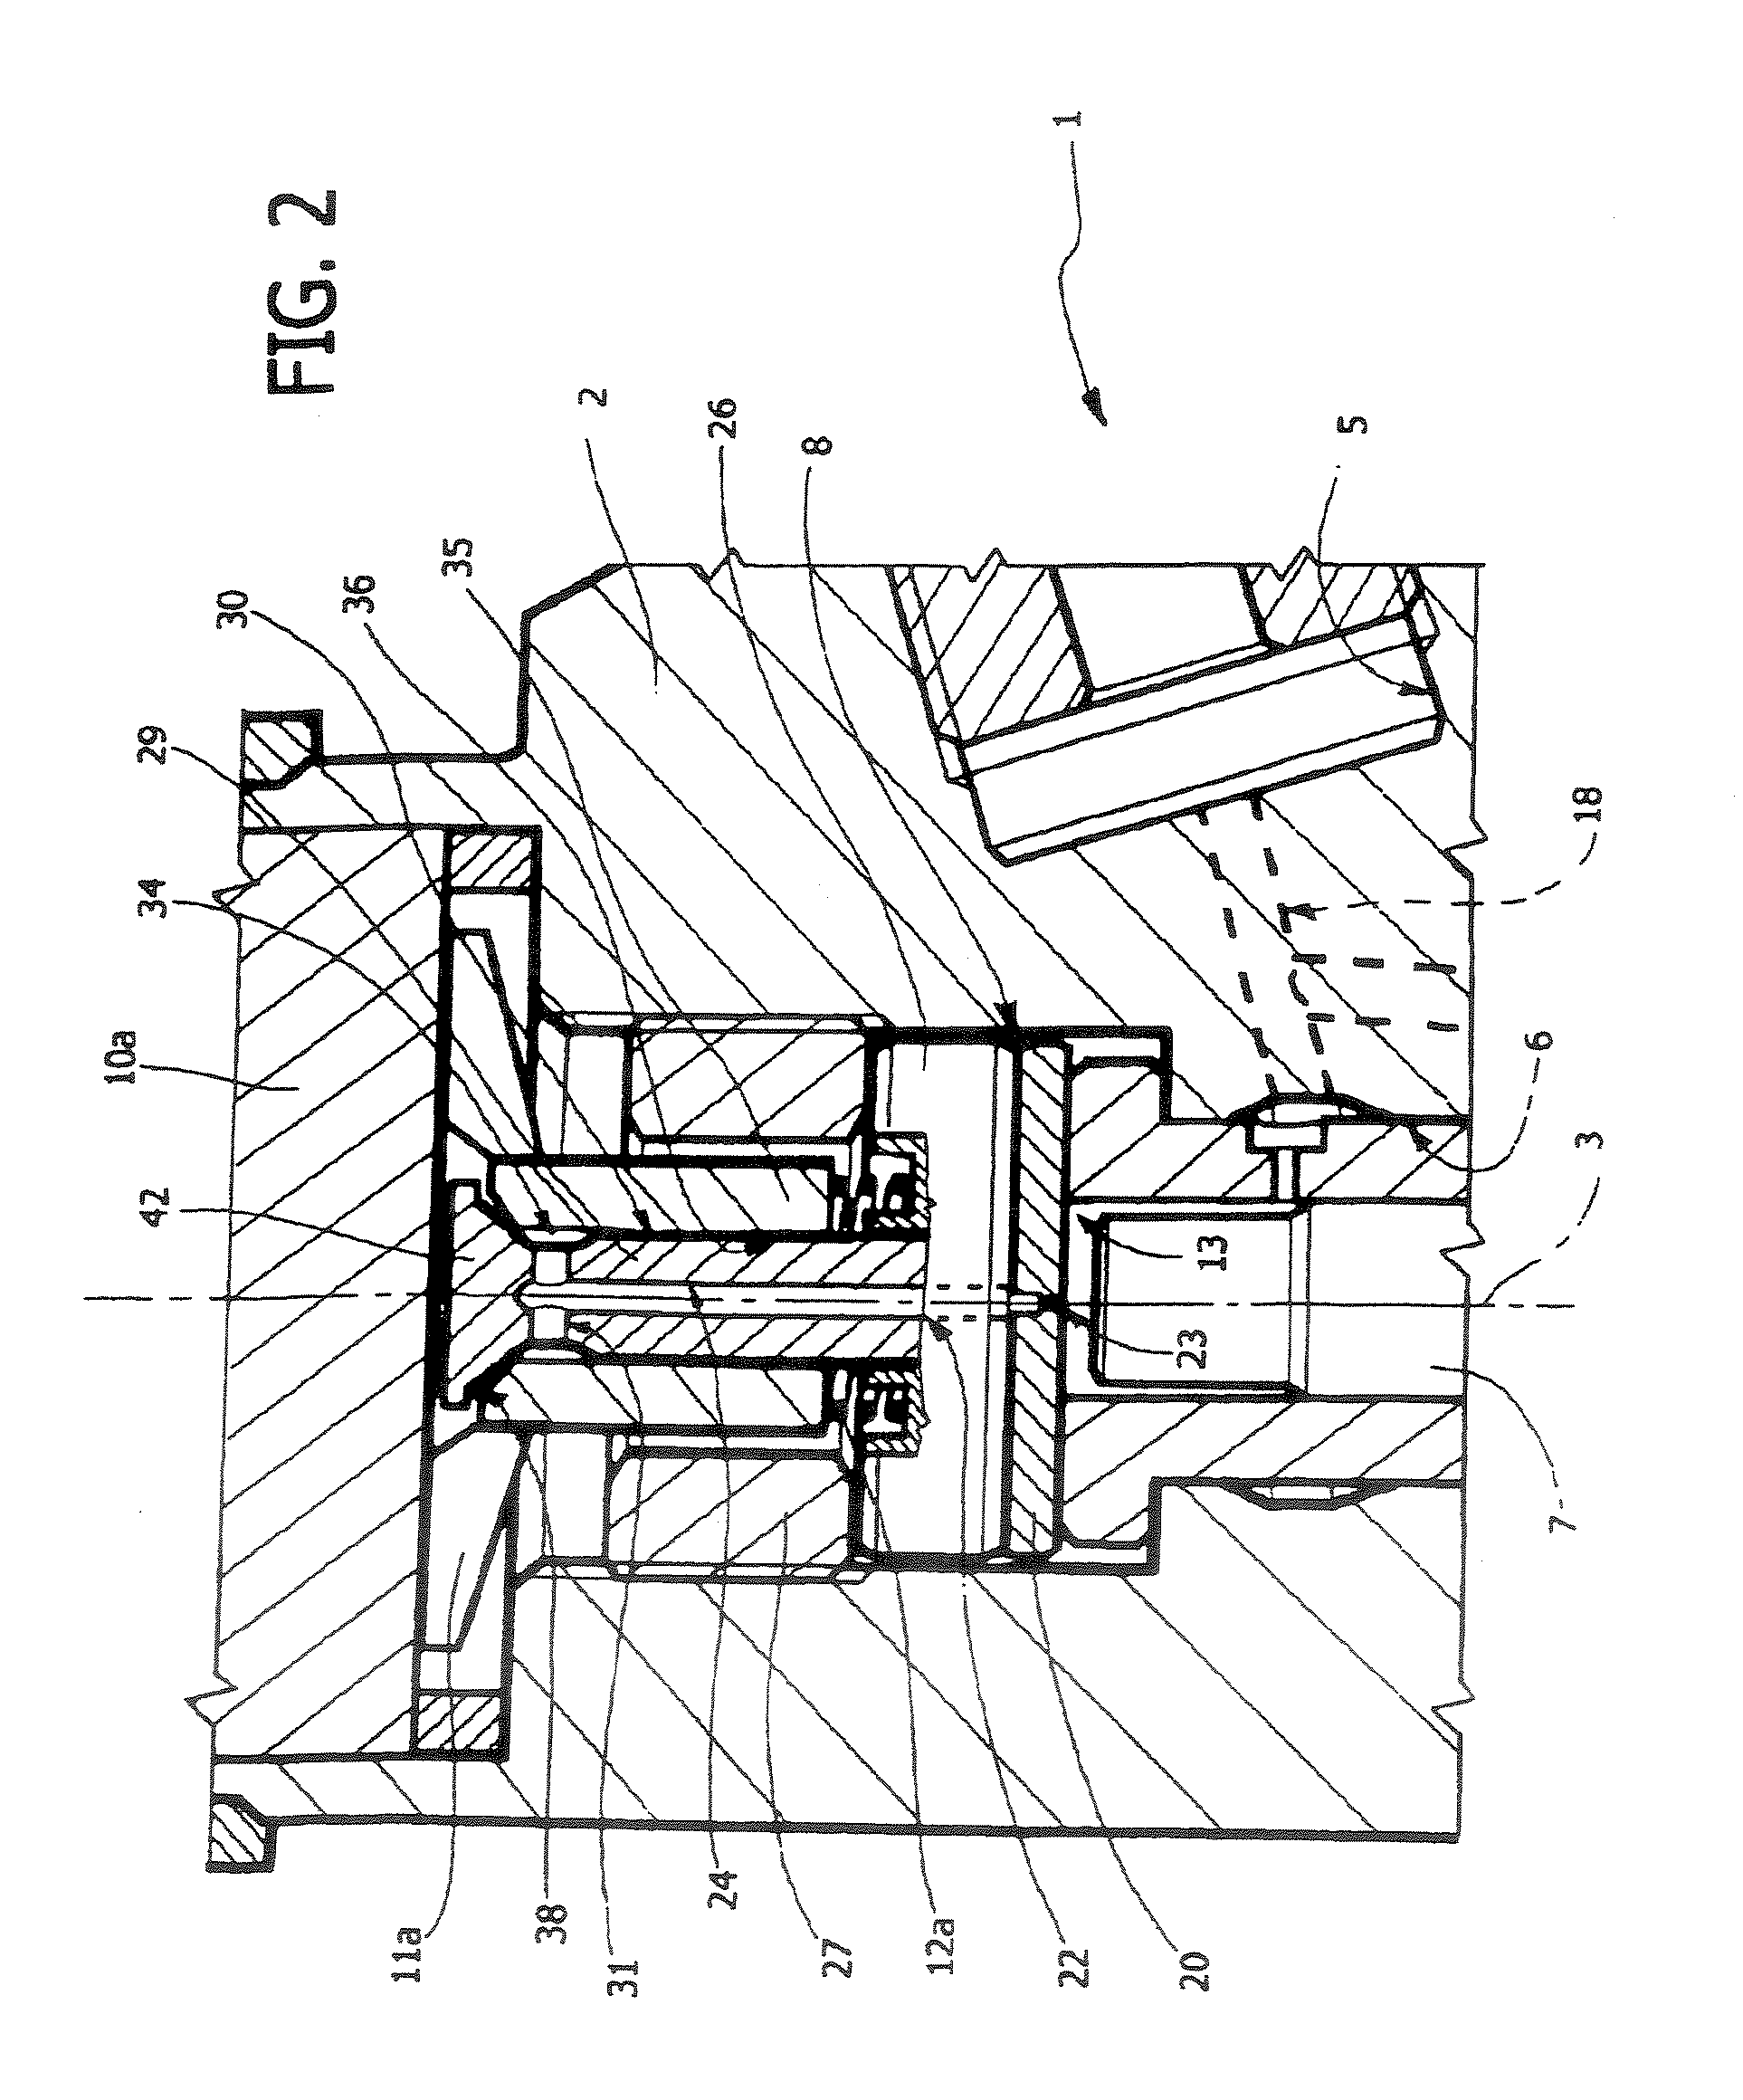 Servo valve for controlling an internal combustion engine injection